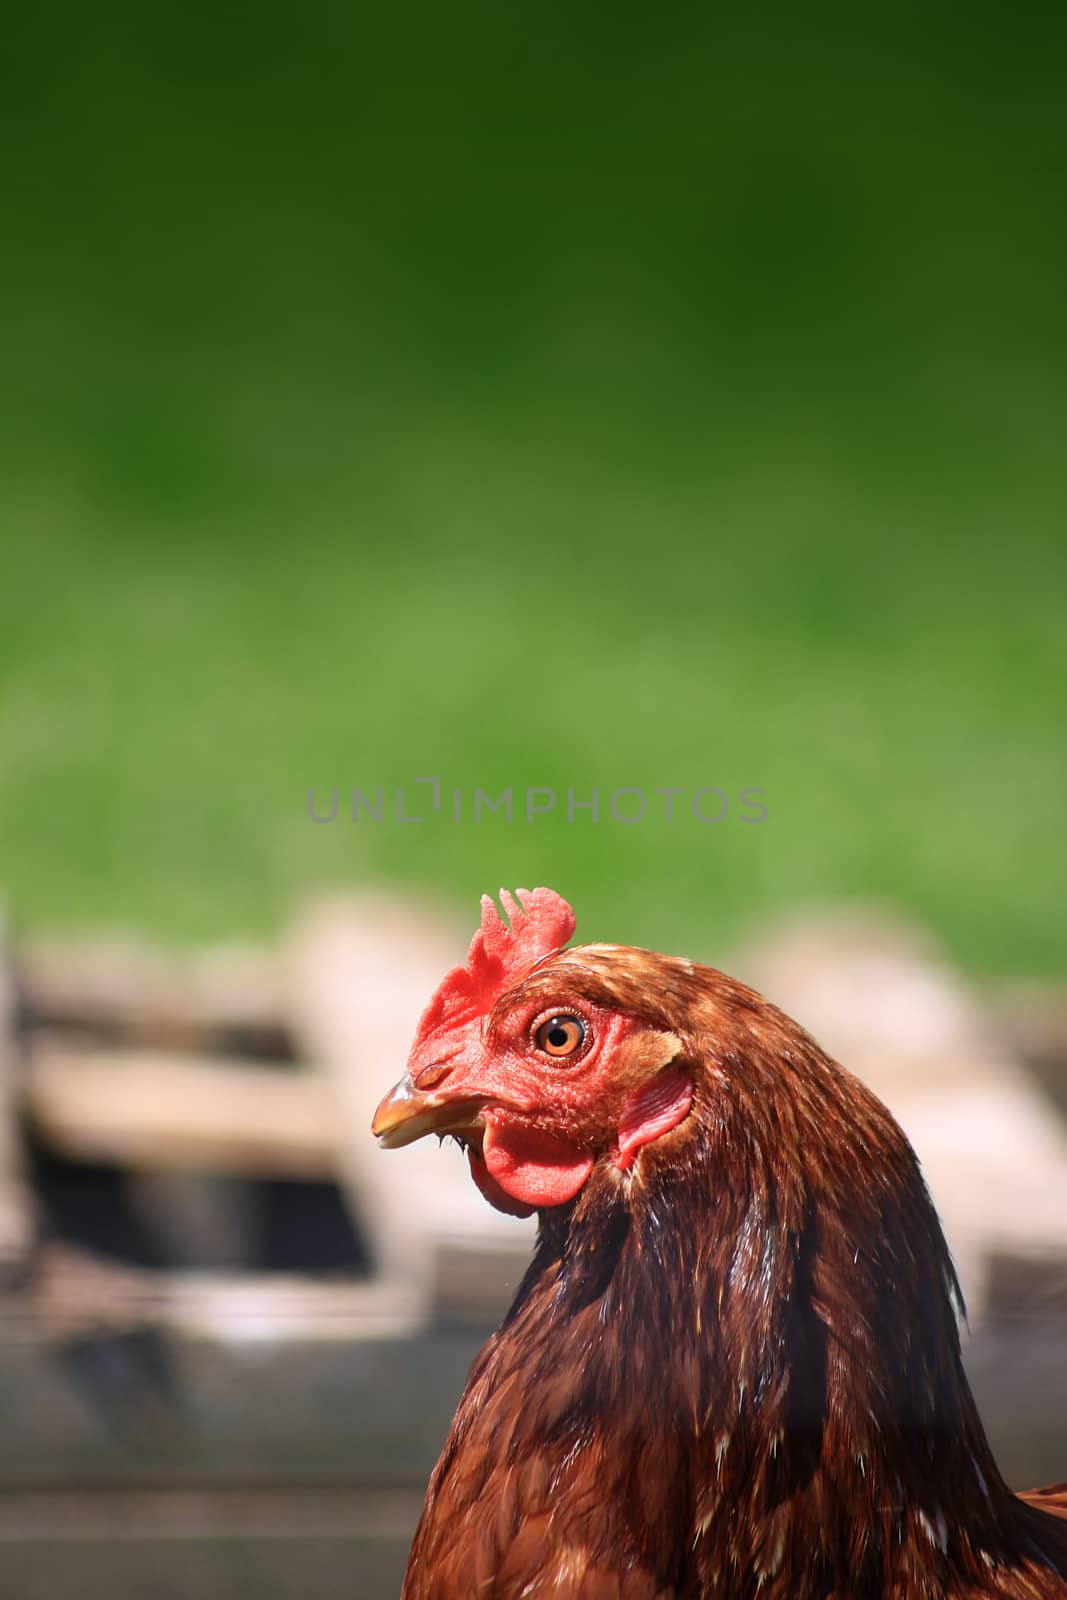 A side on view of a brown hen set against a green background. Set on a portrait format with copy space available above. Located in a city farm environment.